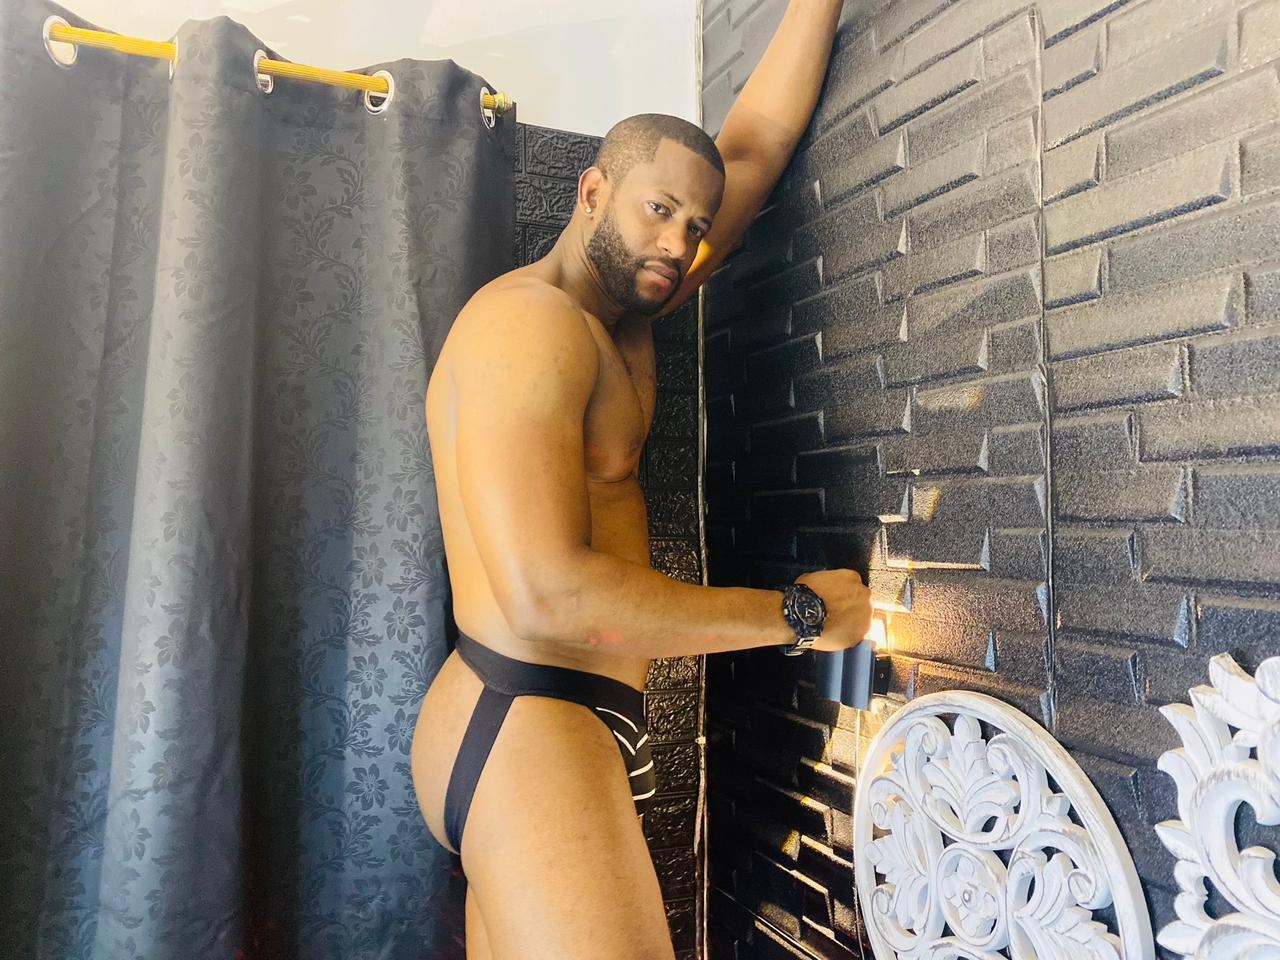 Gay Black Porn Stars Nude - Black Archives - Nude Male Models, Nude Men, Naked Guys & Gay Porn Actors